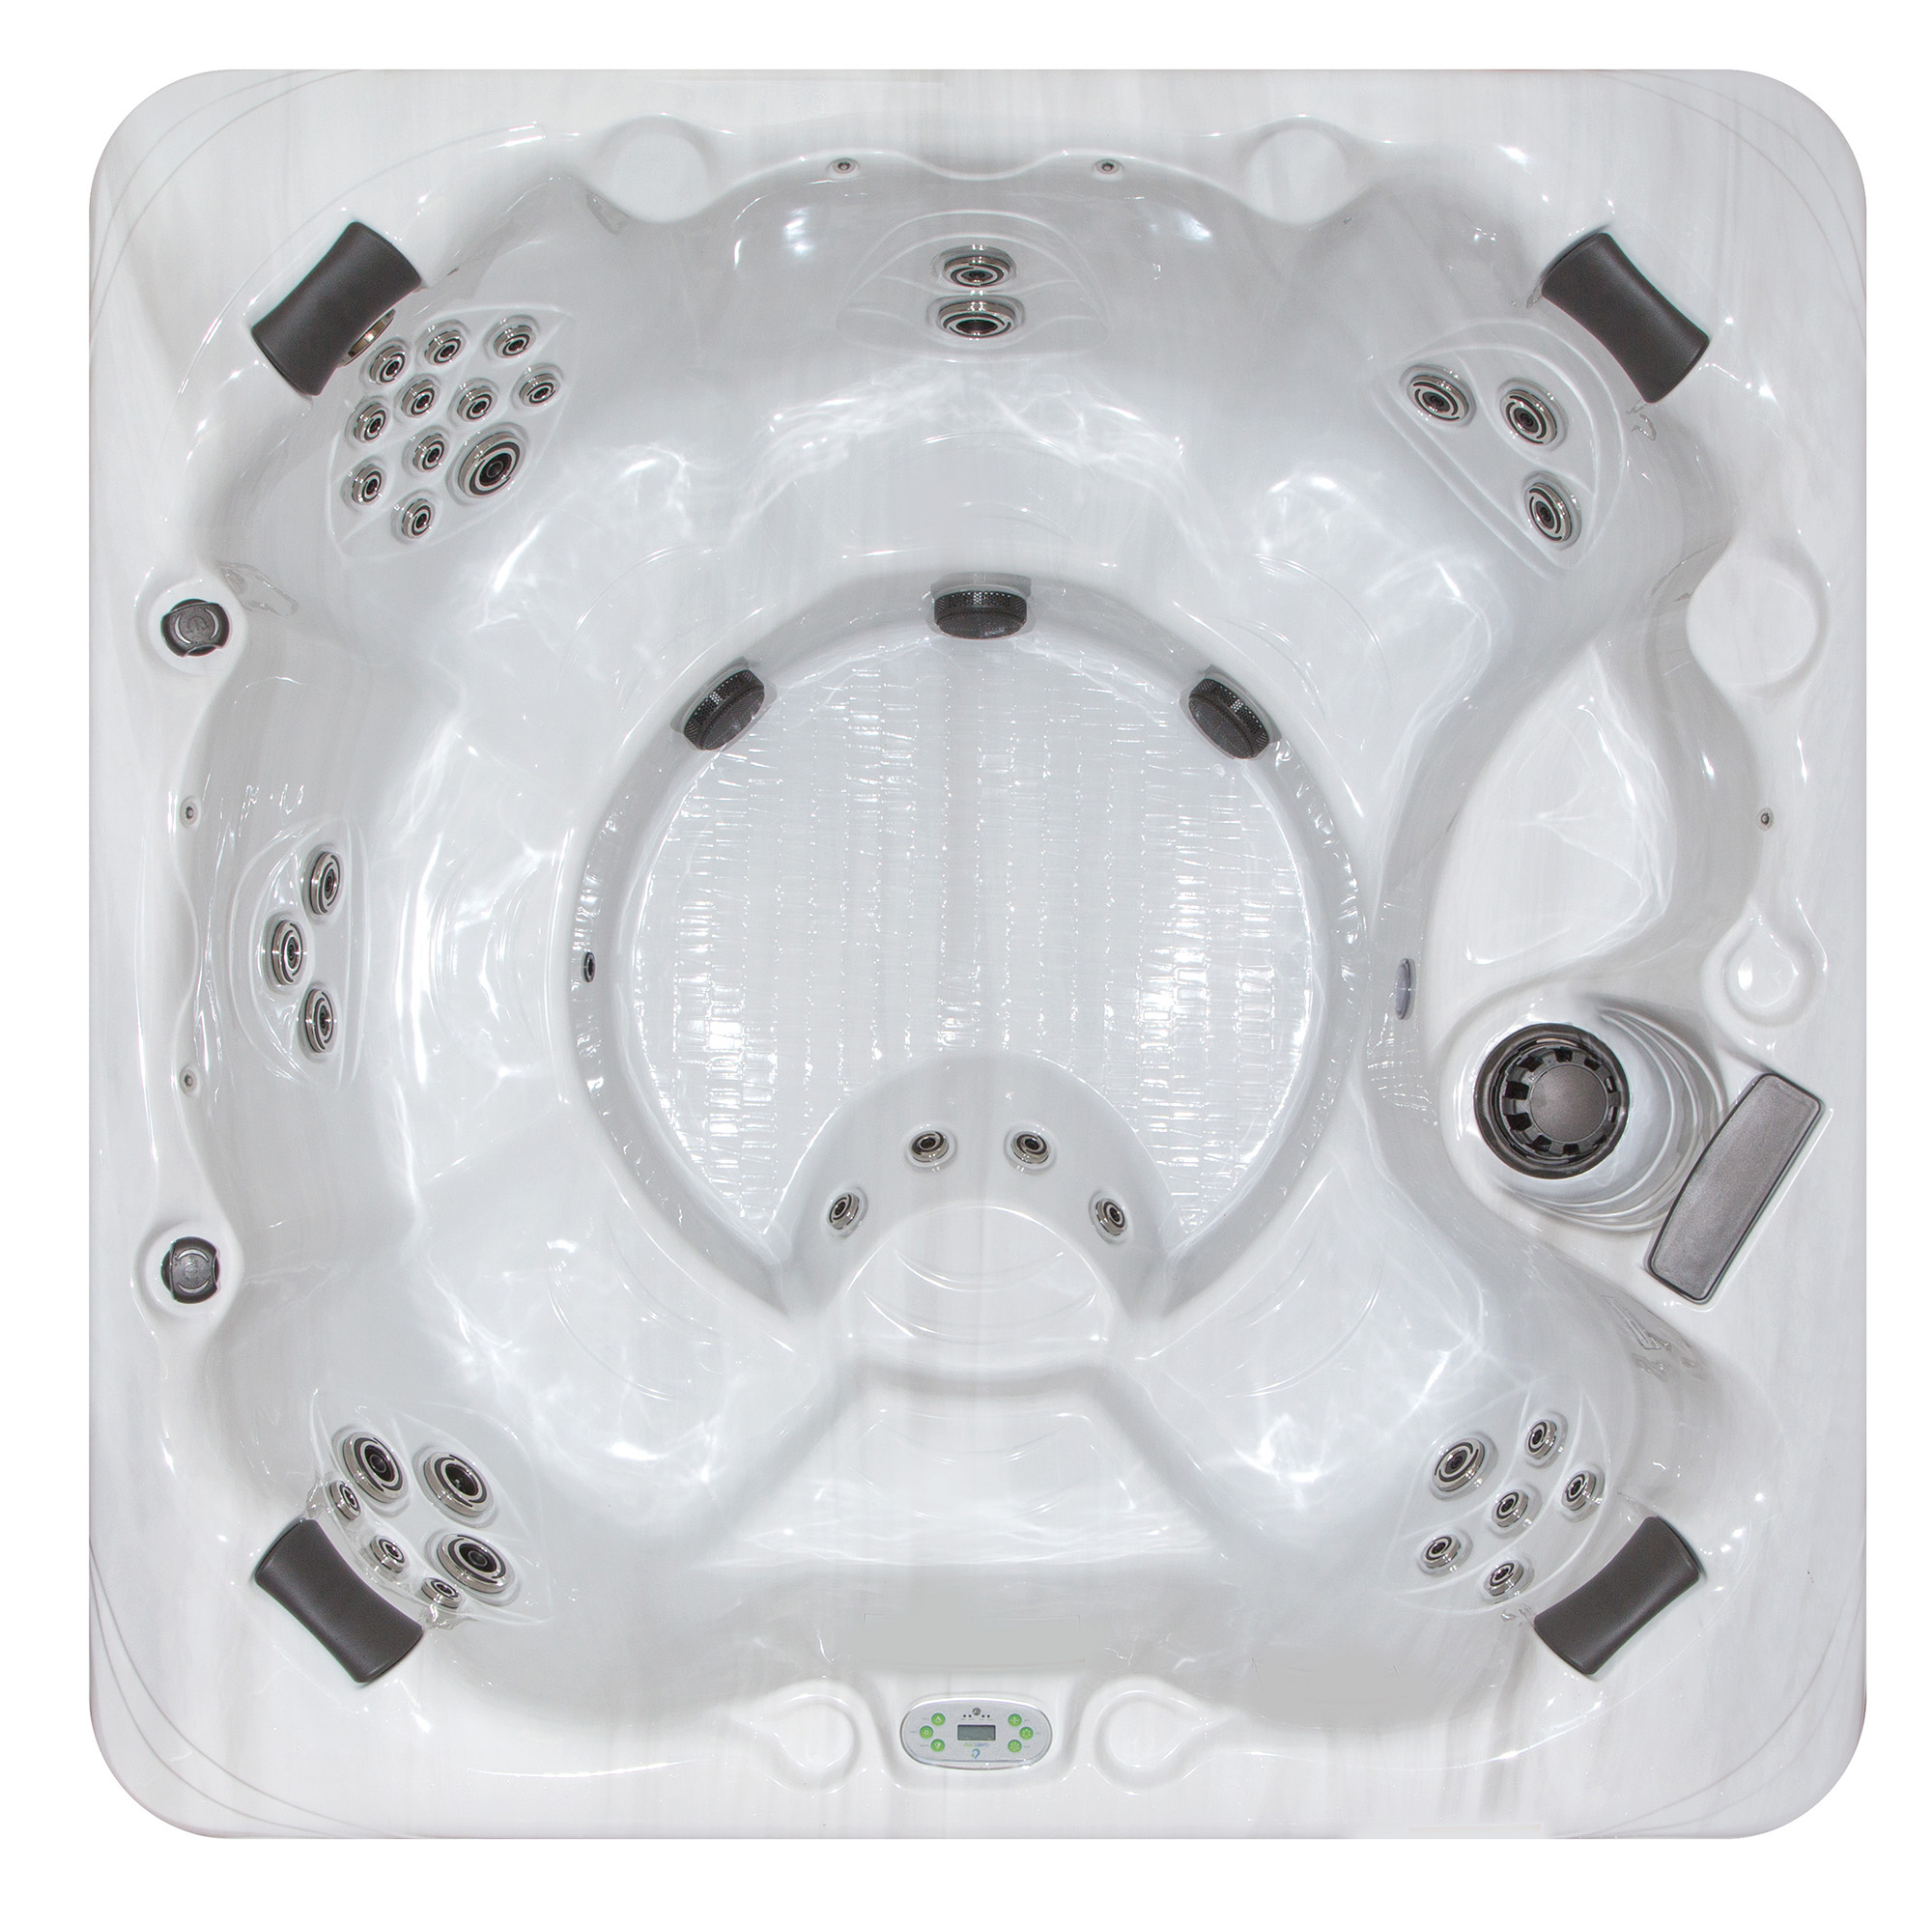 Clarity Spas CLS Precision 7 Hot Tubs